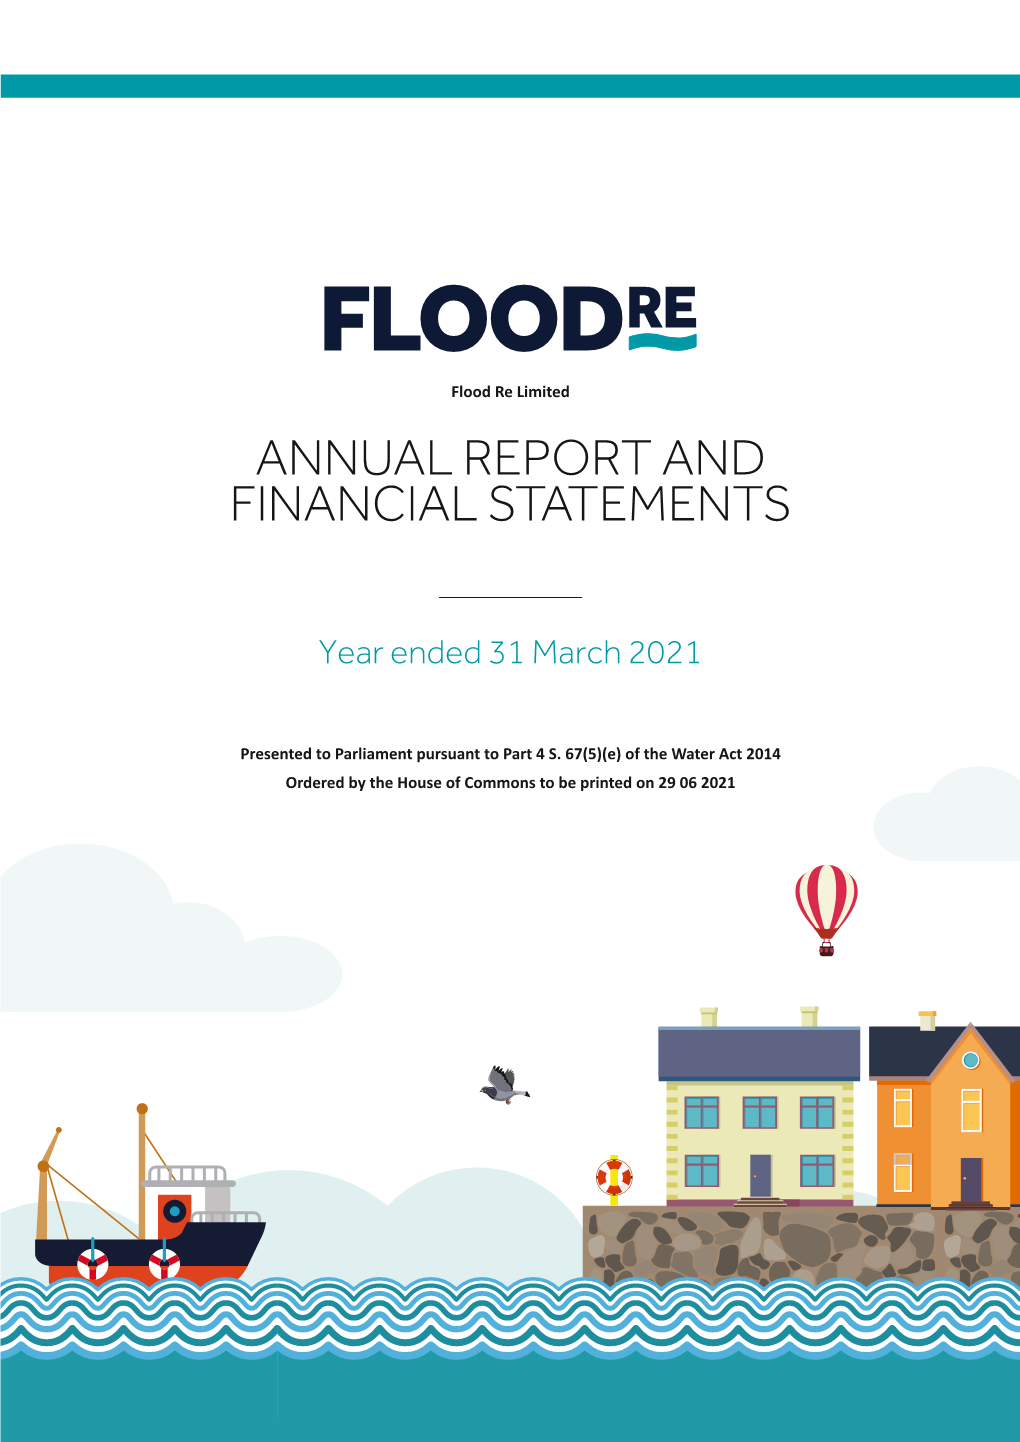 Flood Re Annual Report and Financial Statements